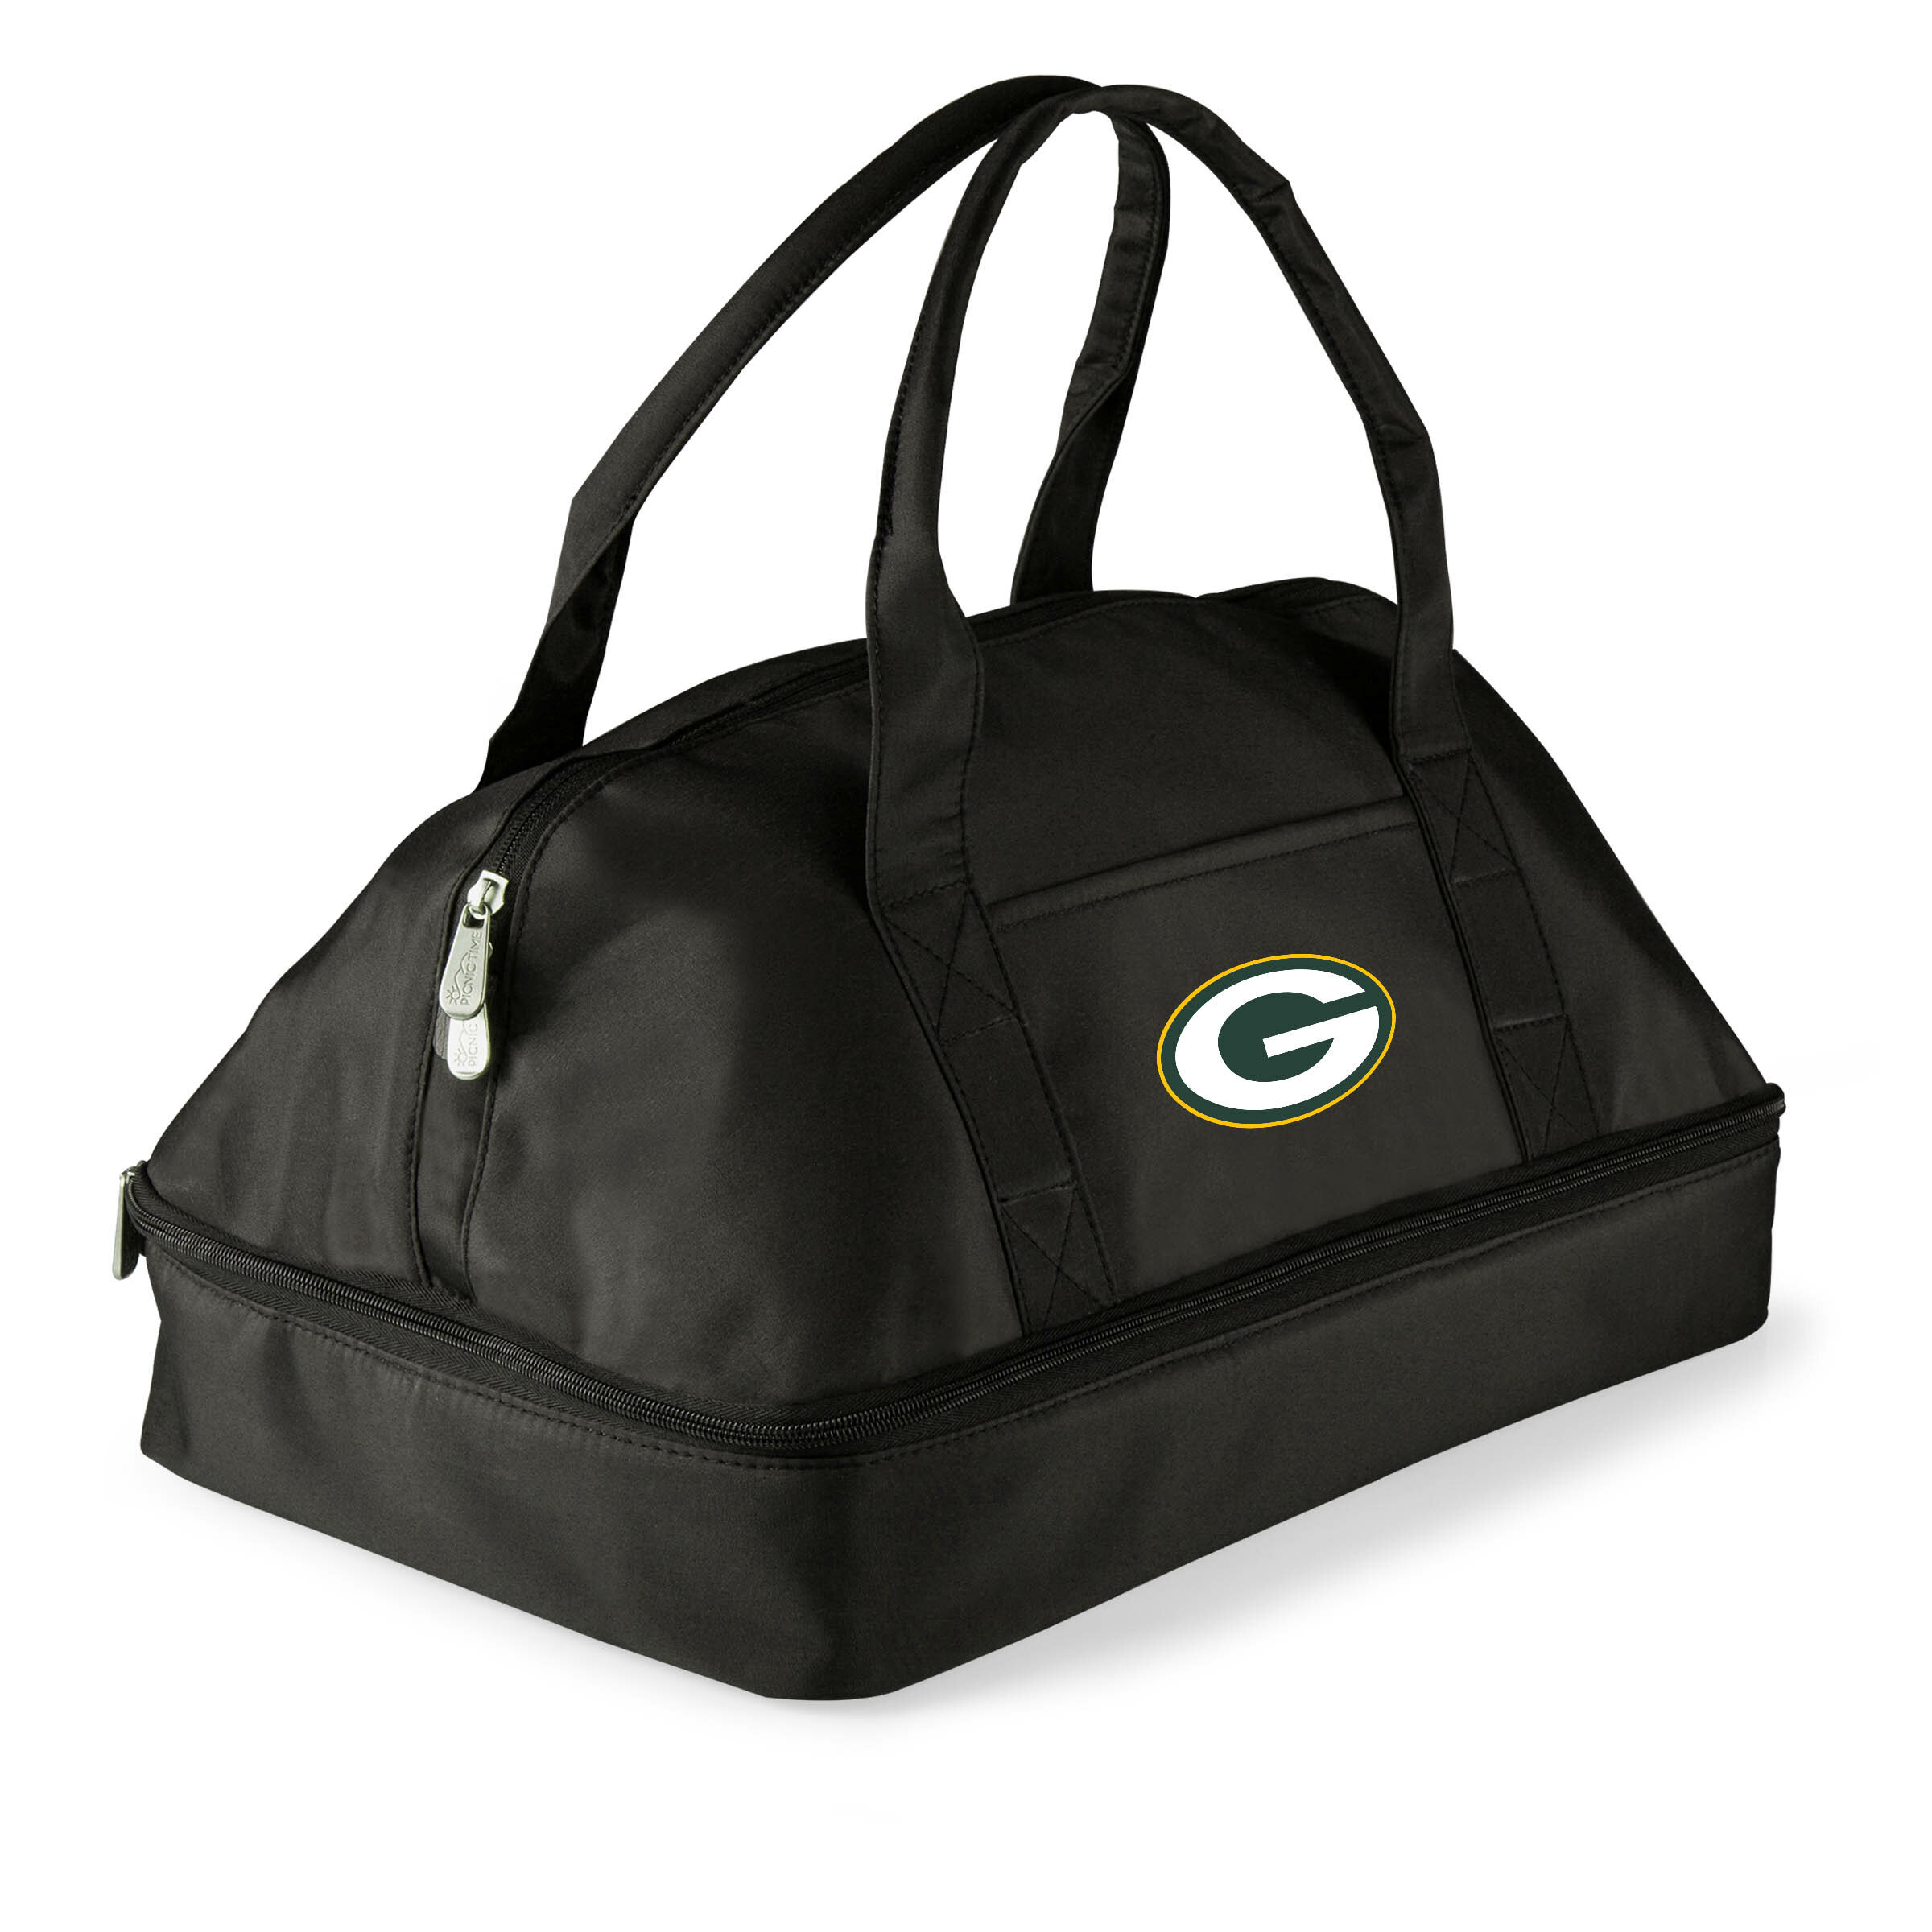 Green Bay Packers IGLOO Cooler Tote at the Packers Pro Shop